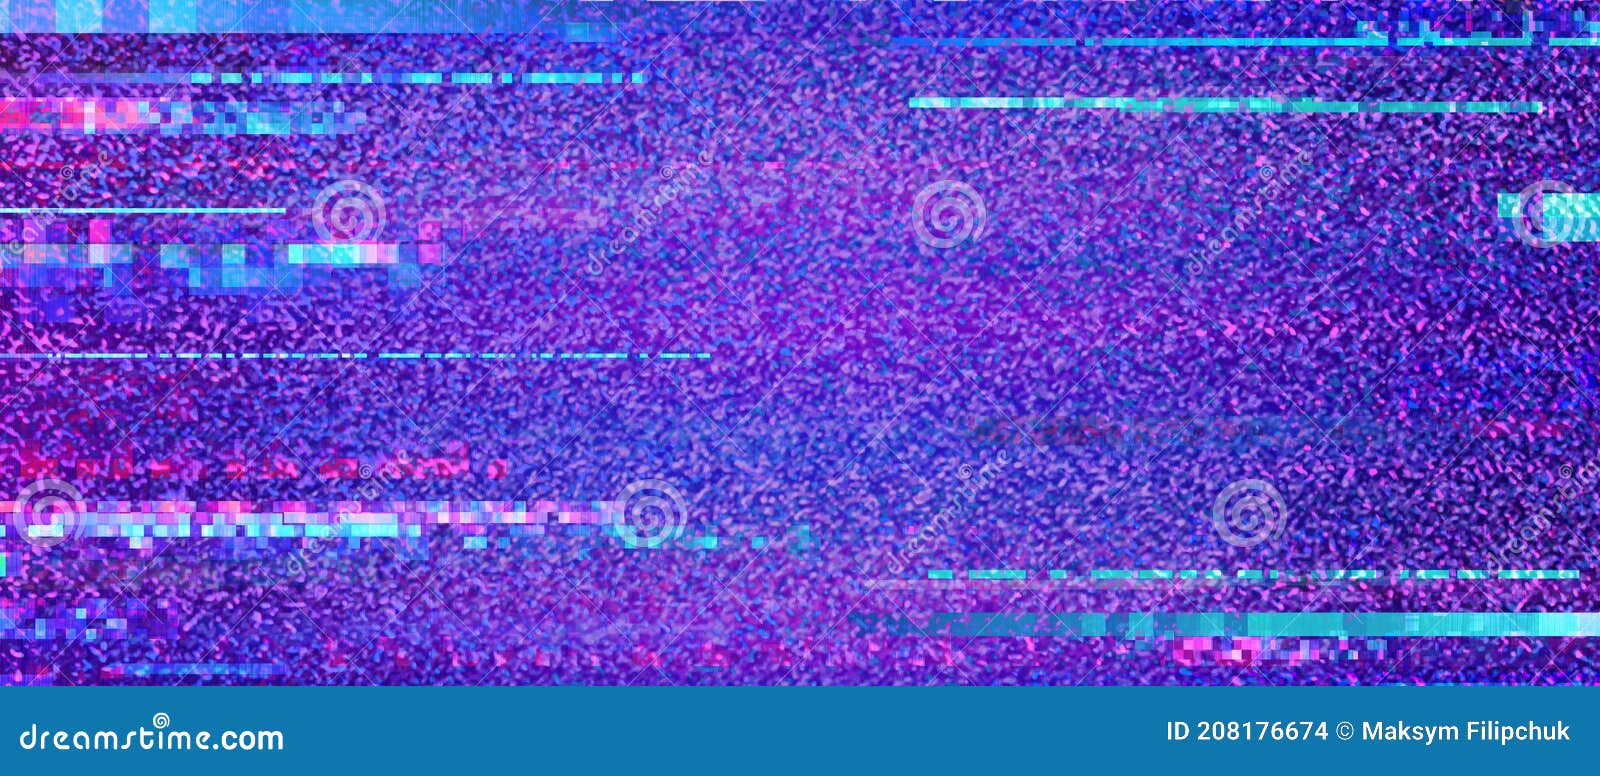 glitchy colorful pixelated tv noise background